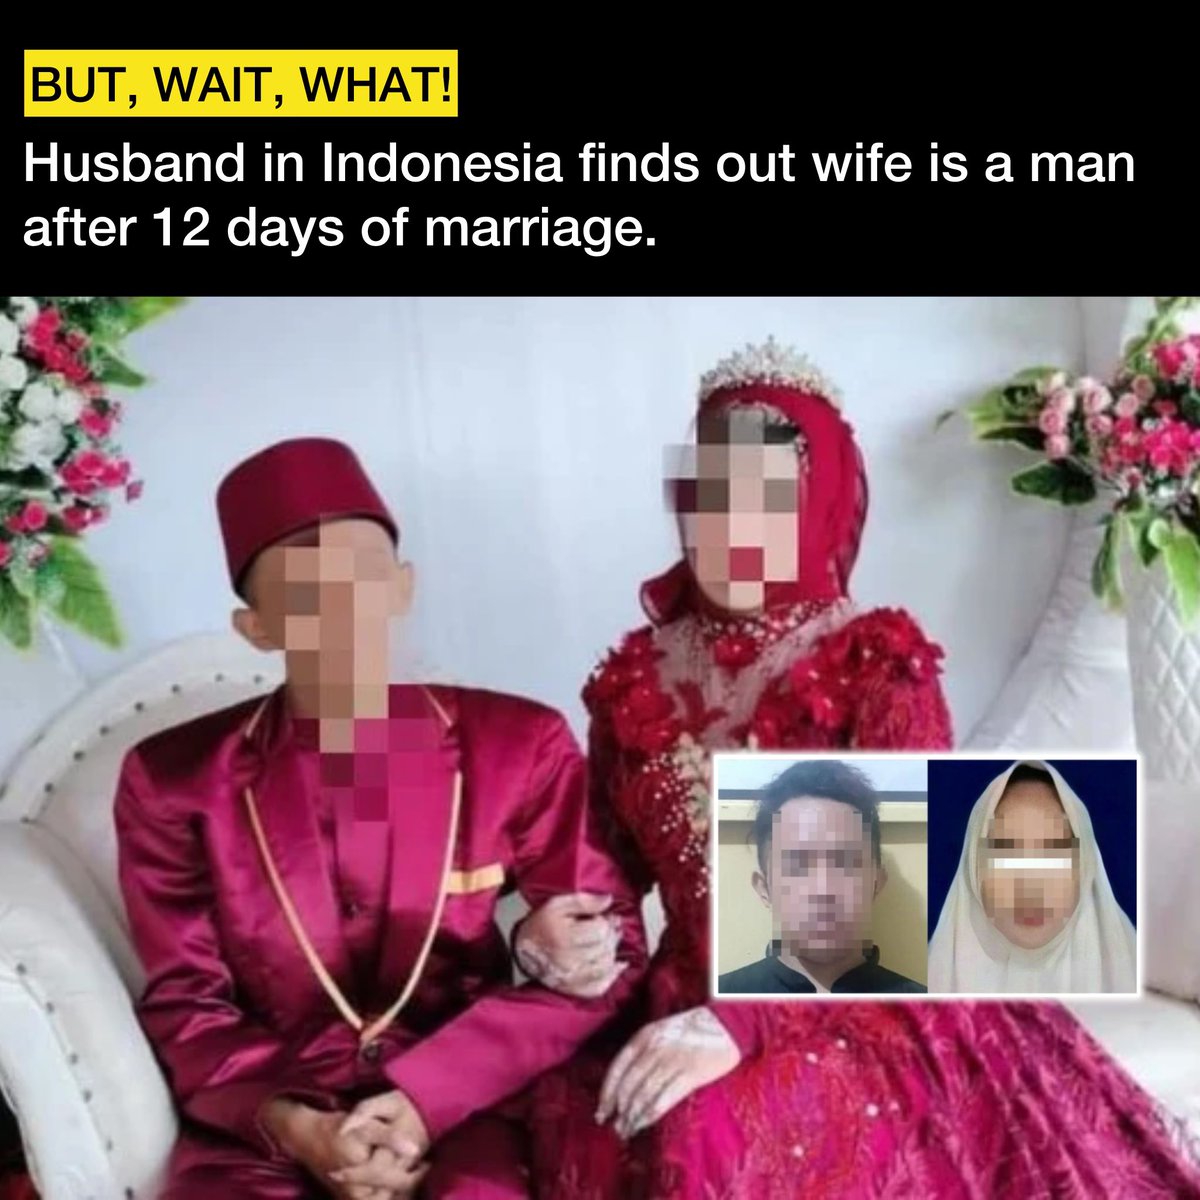 NOW THIS NEWS: In a surprising twist, a young man recently got the shock of his life after knowing that his wife of 12 days was actually a man disguised as a woman in Indonesia. 😵 The man disguised as a woman reportedly wanted to get money from the victim. 😵‍💫 Thoughts?